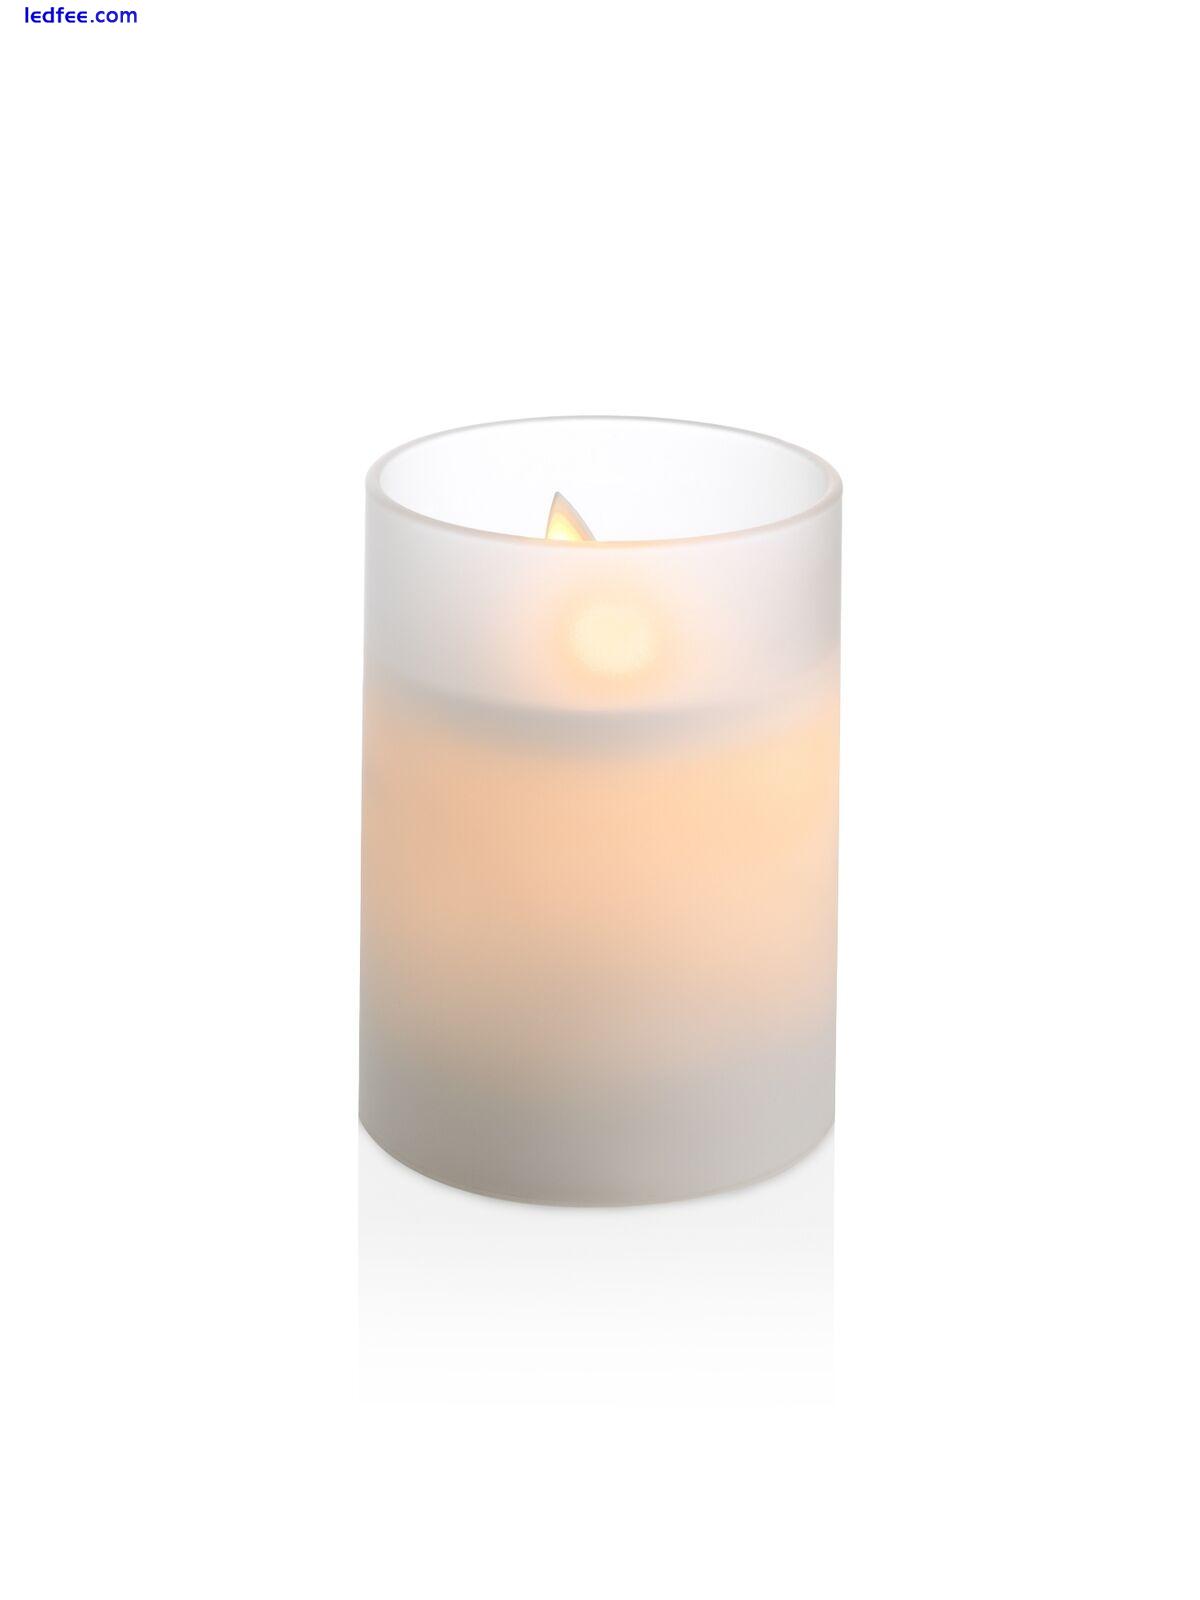 Auraglow Frosted Glass Flickering Flameless LED Decorative Candle Safety Flame 2 